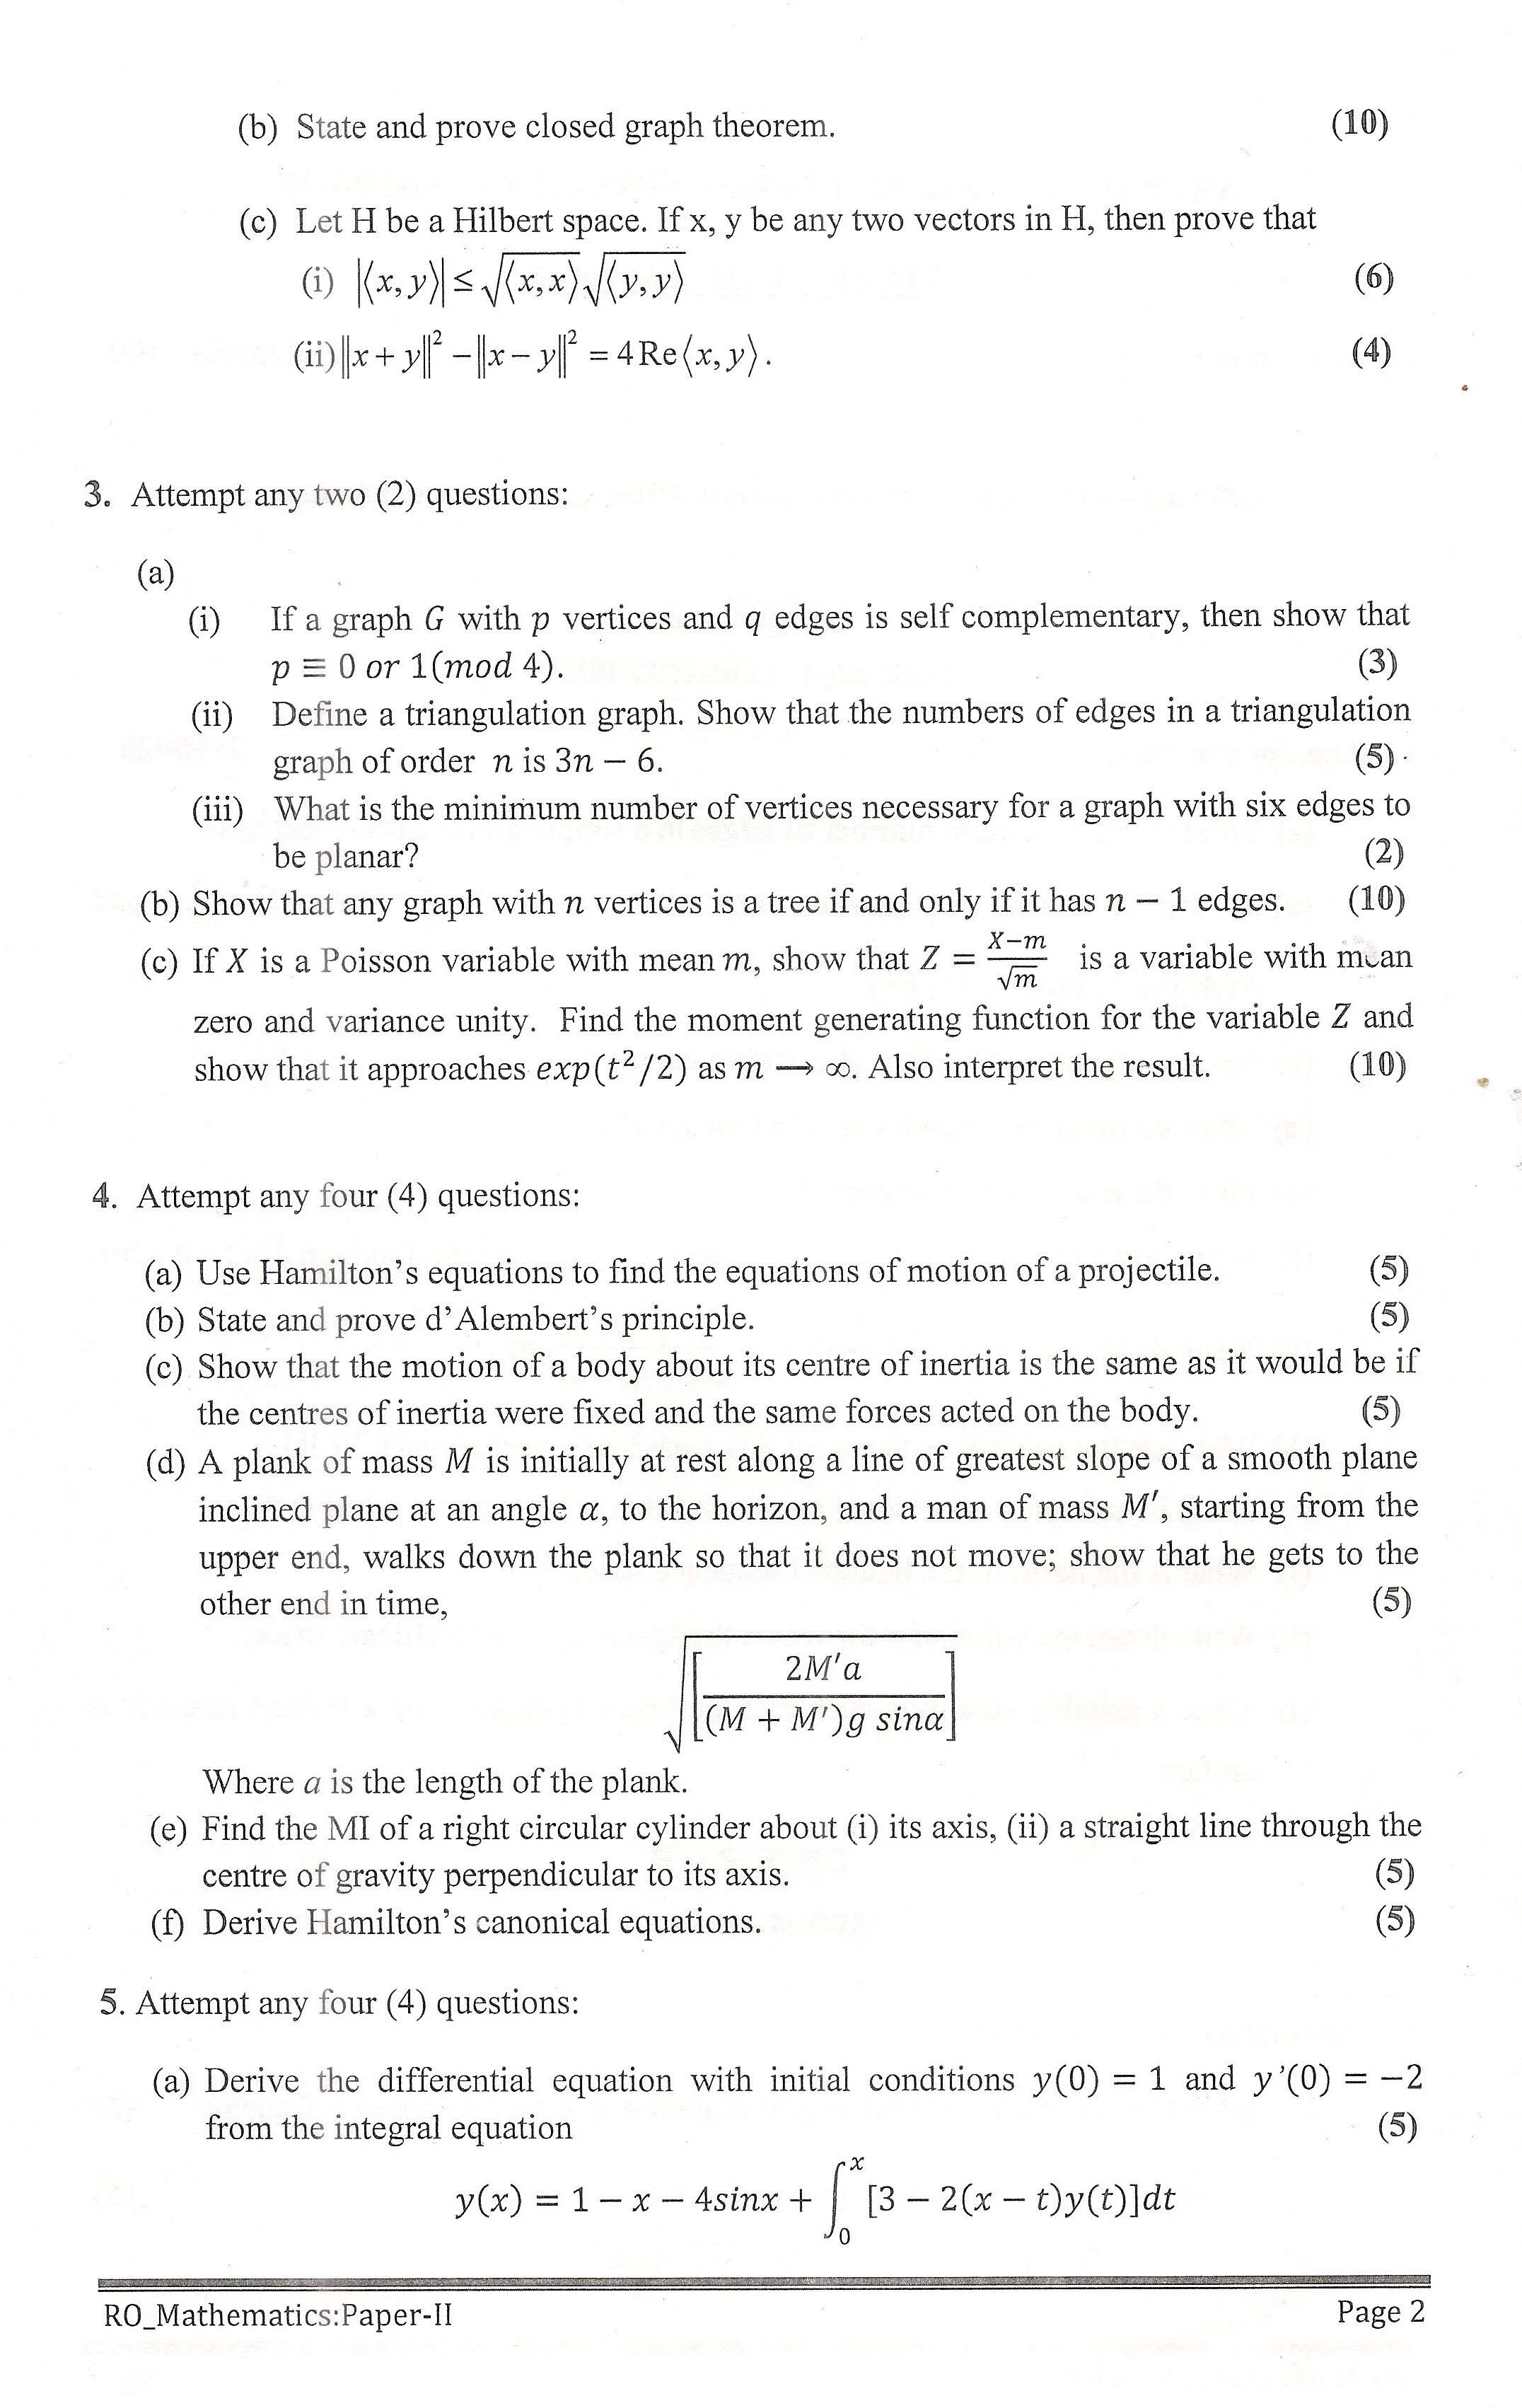 APPSC Research Officer Mathematics Paper II Exam Question Paper 2014 2